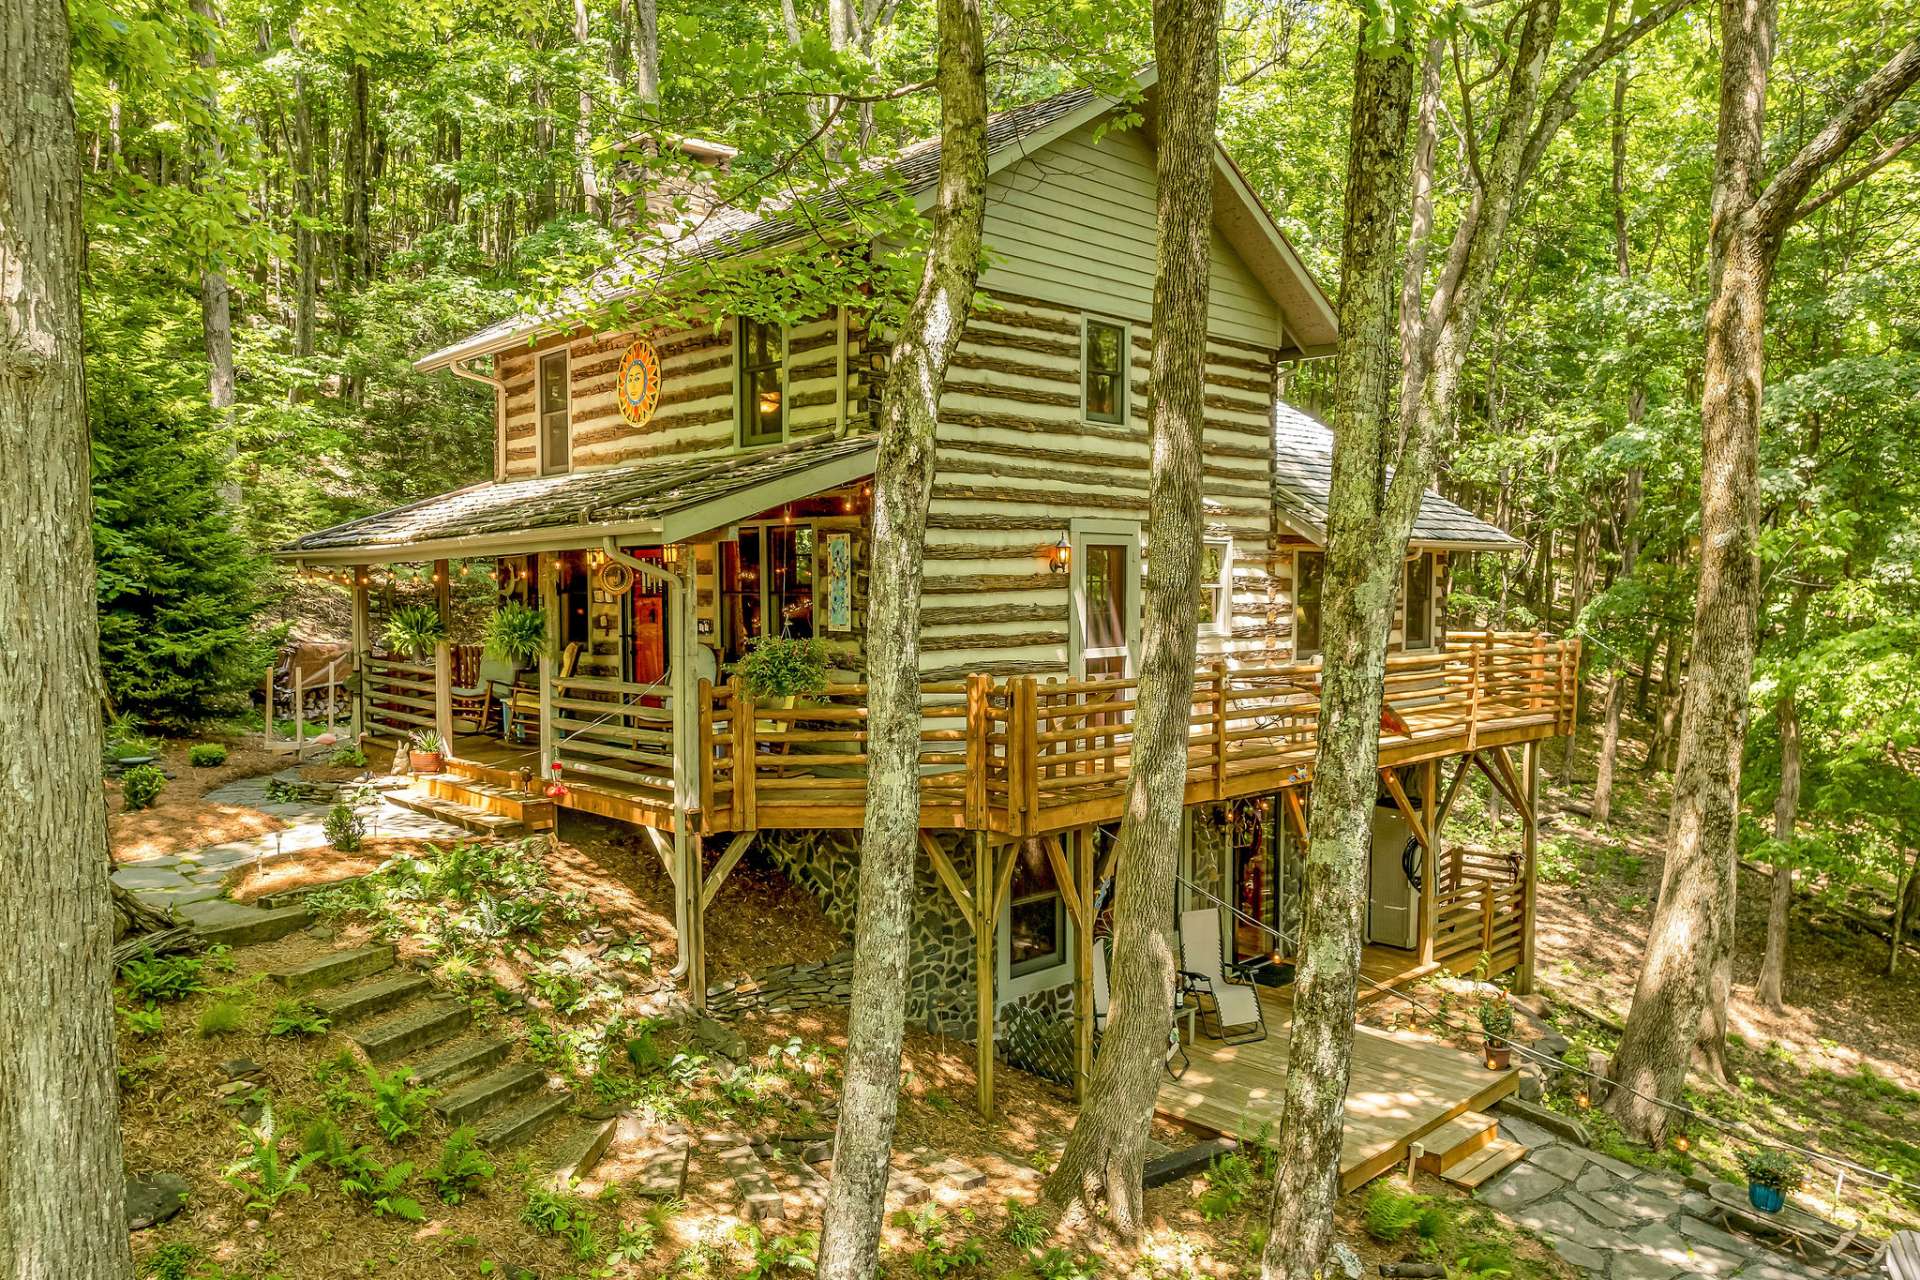 Nature lovers will adore this private wooded wonderland situated in a story book setting with so much to see and explore.